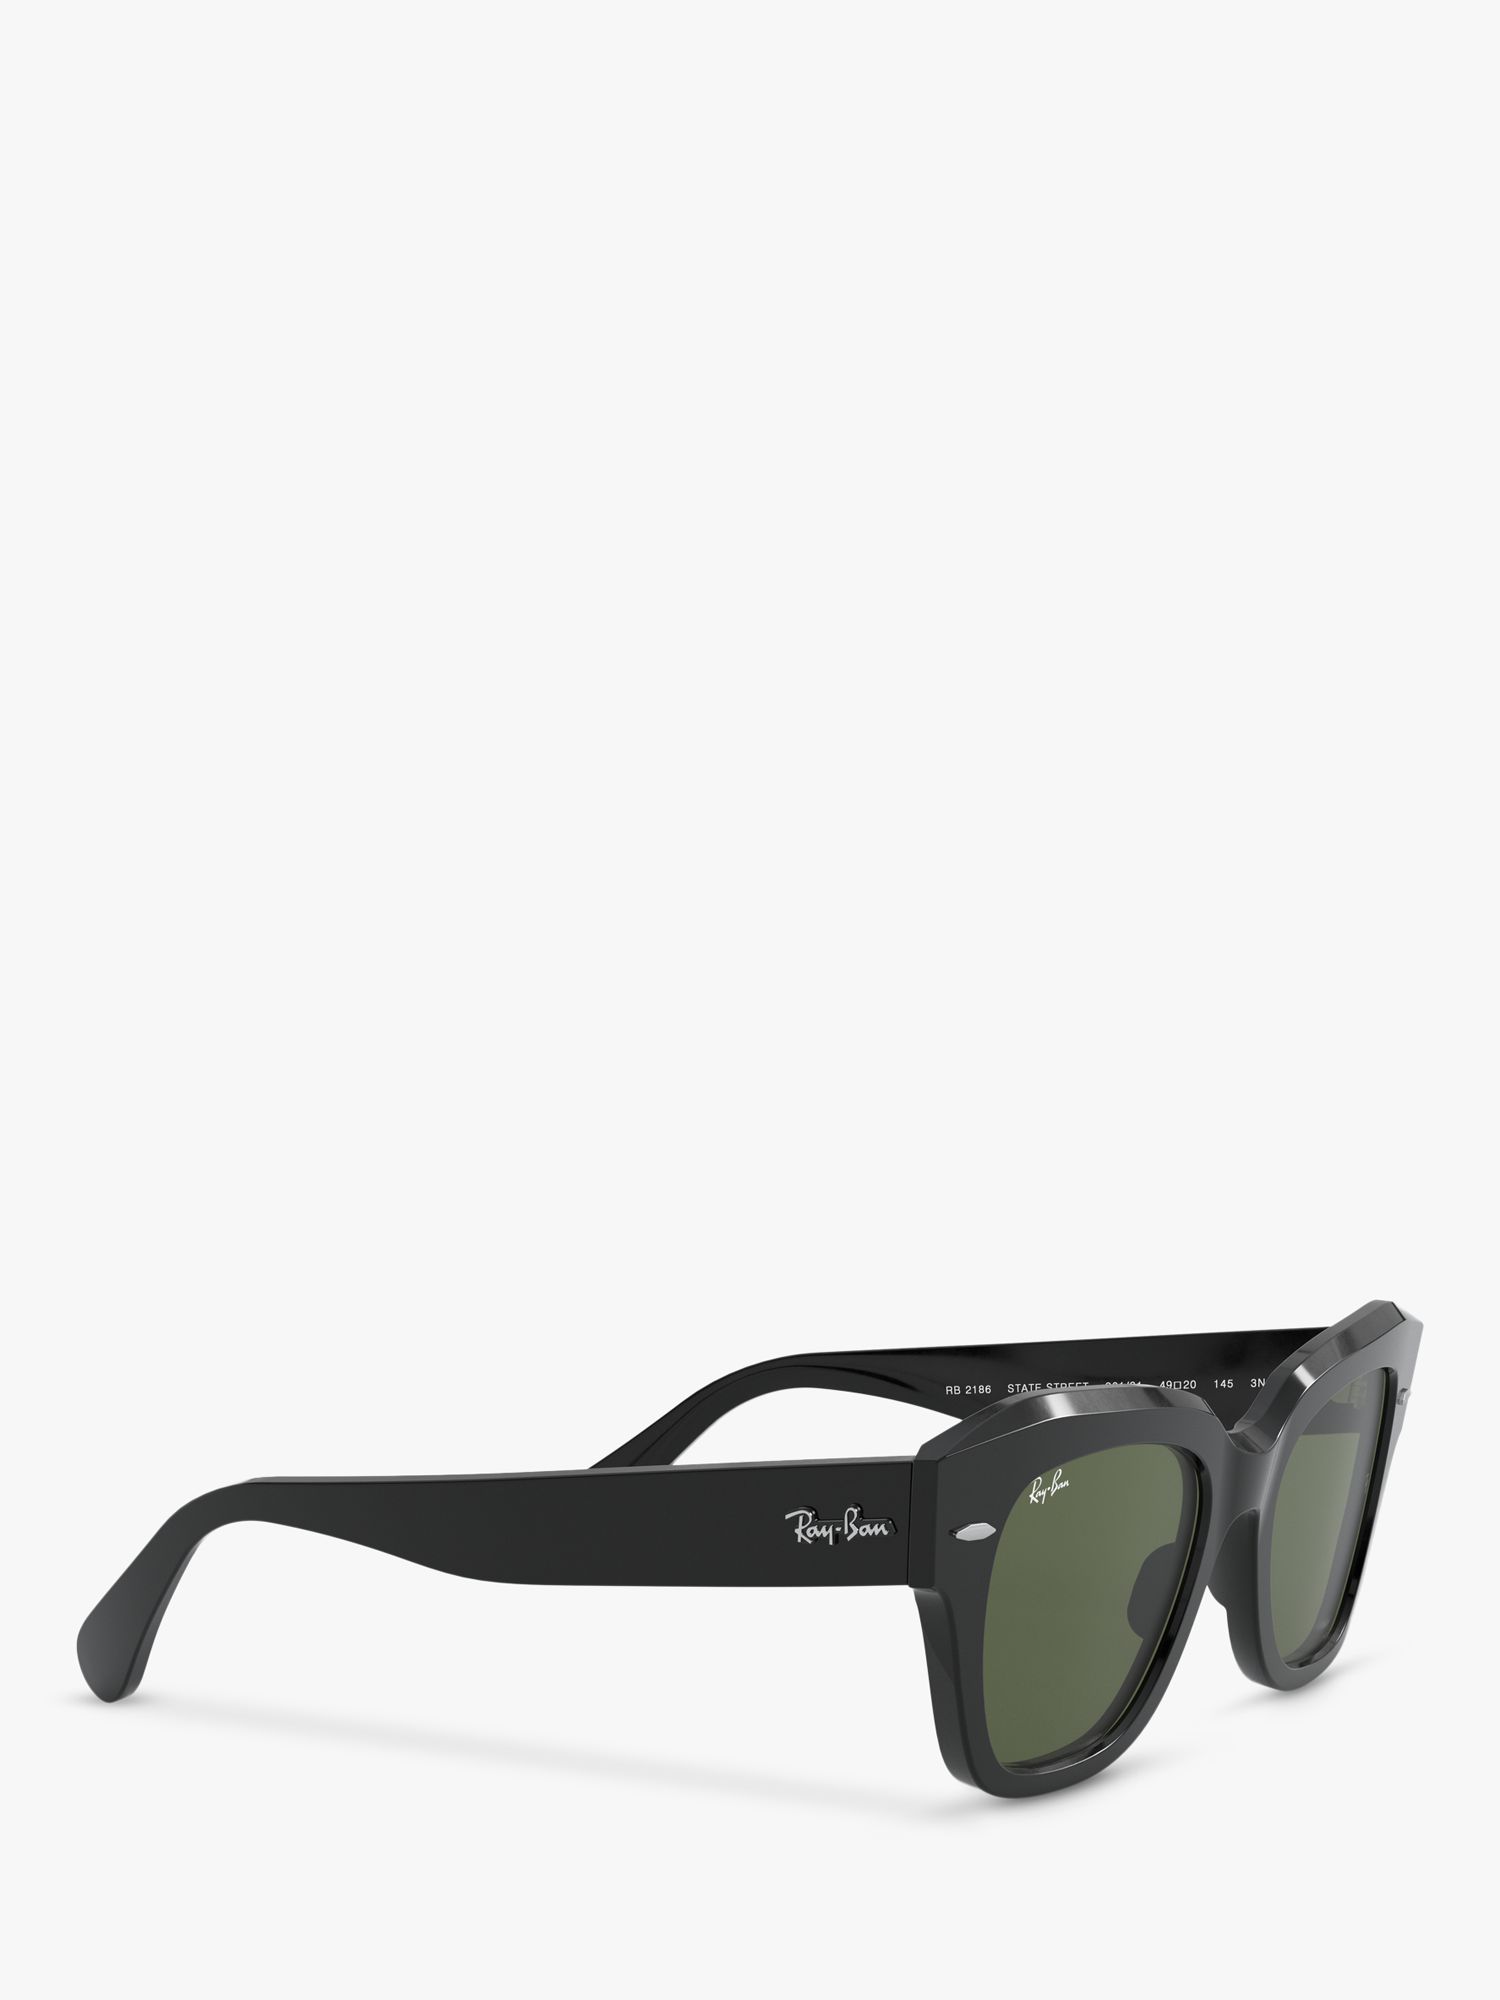 Buy Ray-Ban RB2186 Unisex Square Sunglasses, Black Online at johnlewis.com